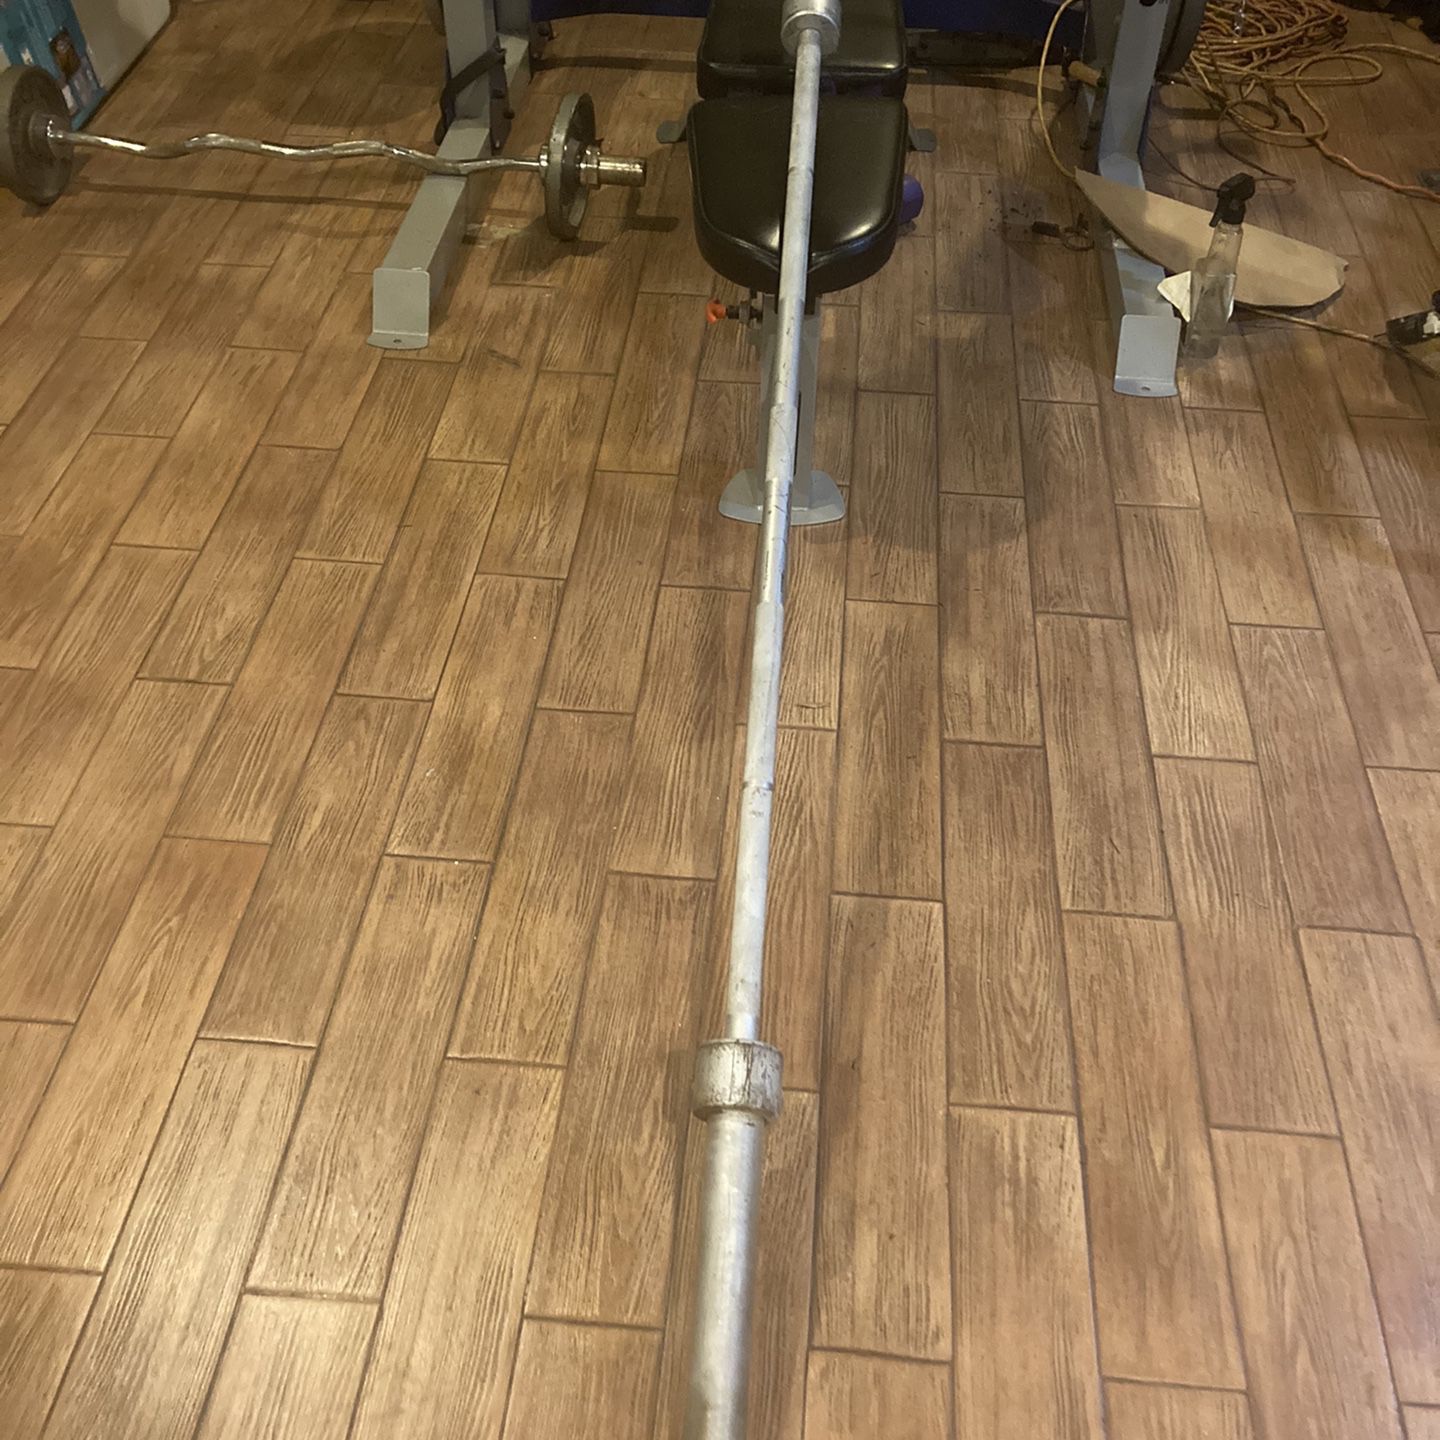 7 Ft. Bench Press Bar, No Weights Or Clamps Just Bar. I Am Willing To Trade For Two 35 Lb 2inch Plates. If Ad Is Up Still Avail